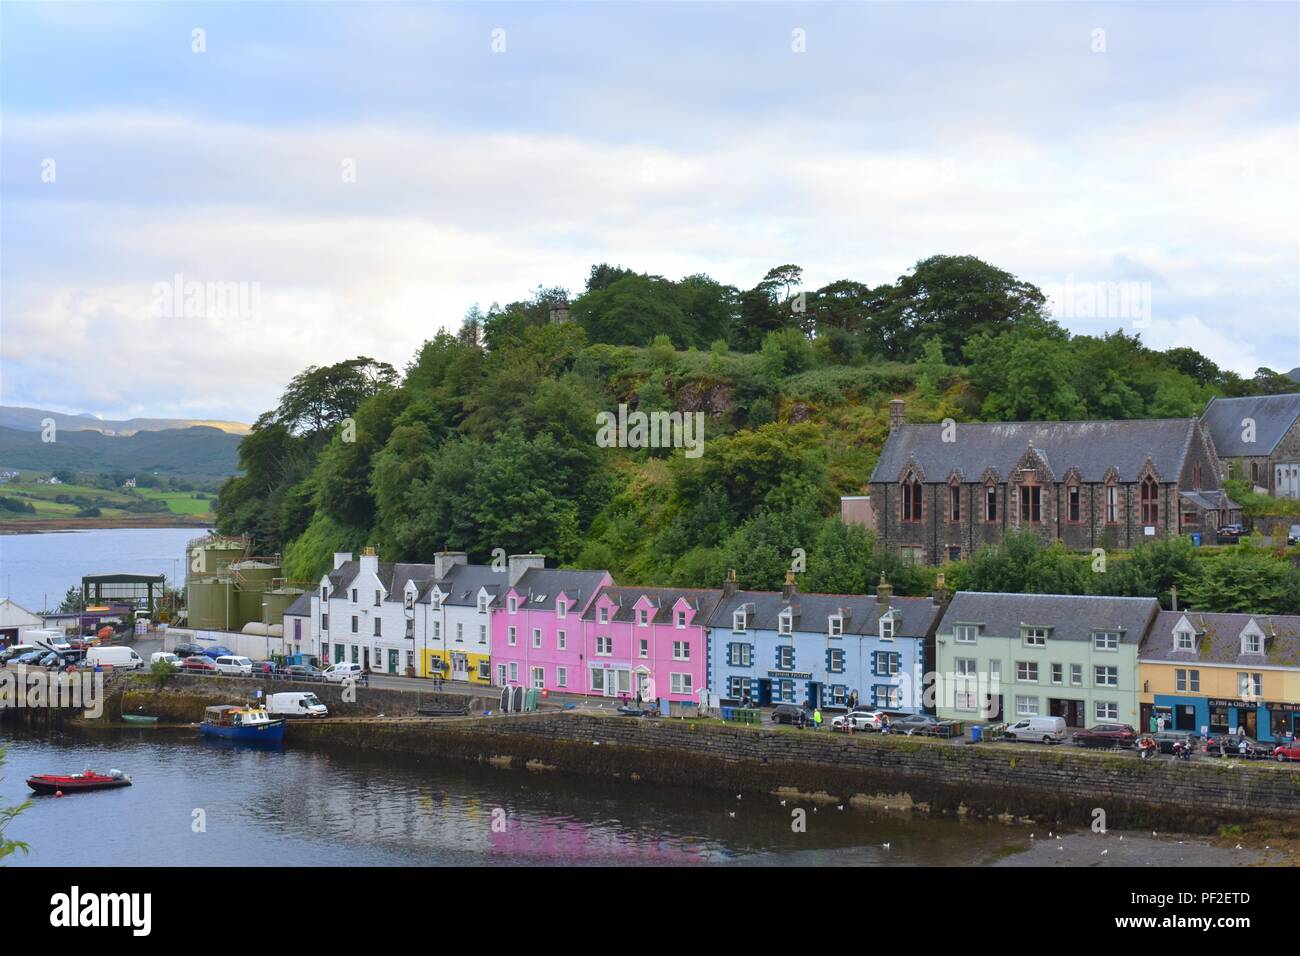 Portree, Isle of Skye, Scotland Banque D'Images